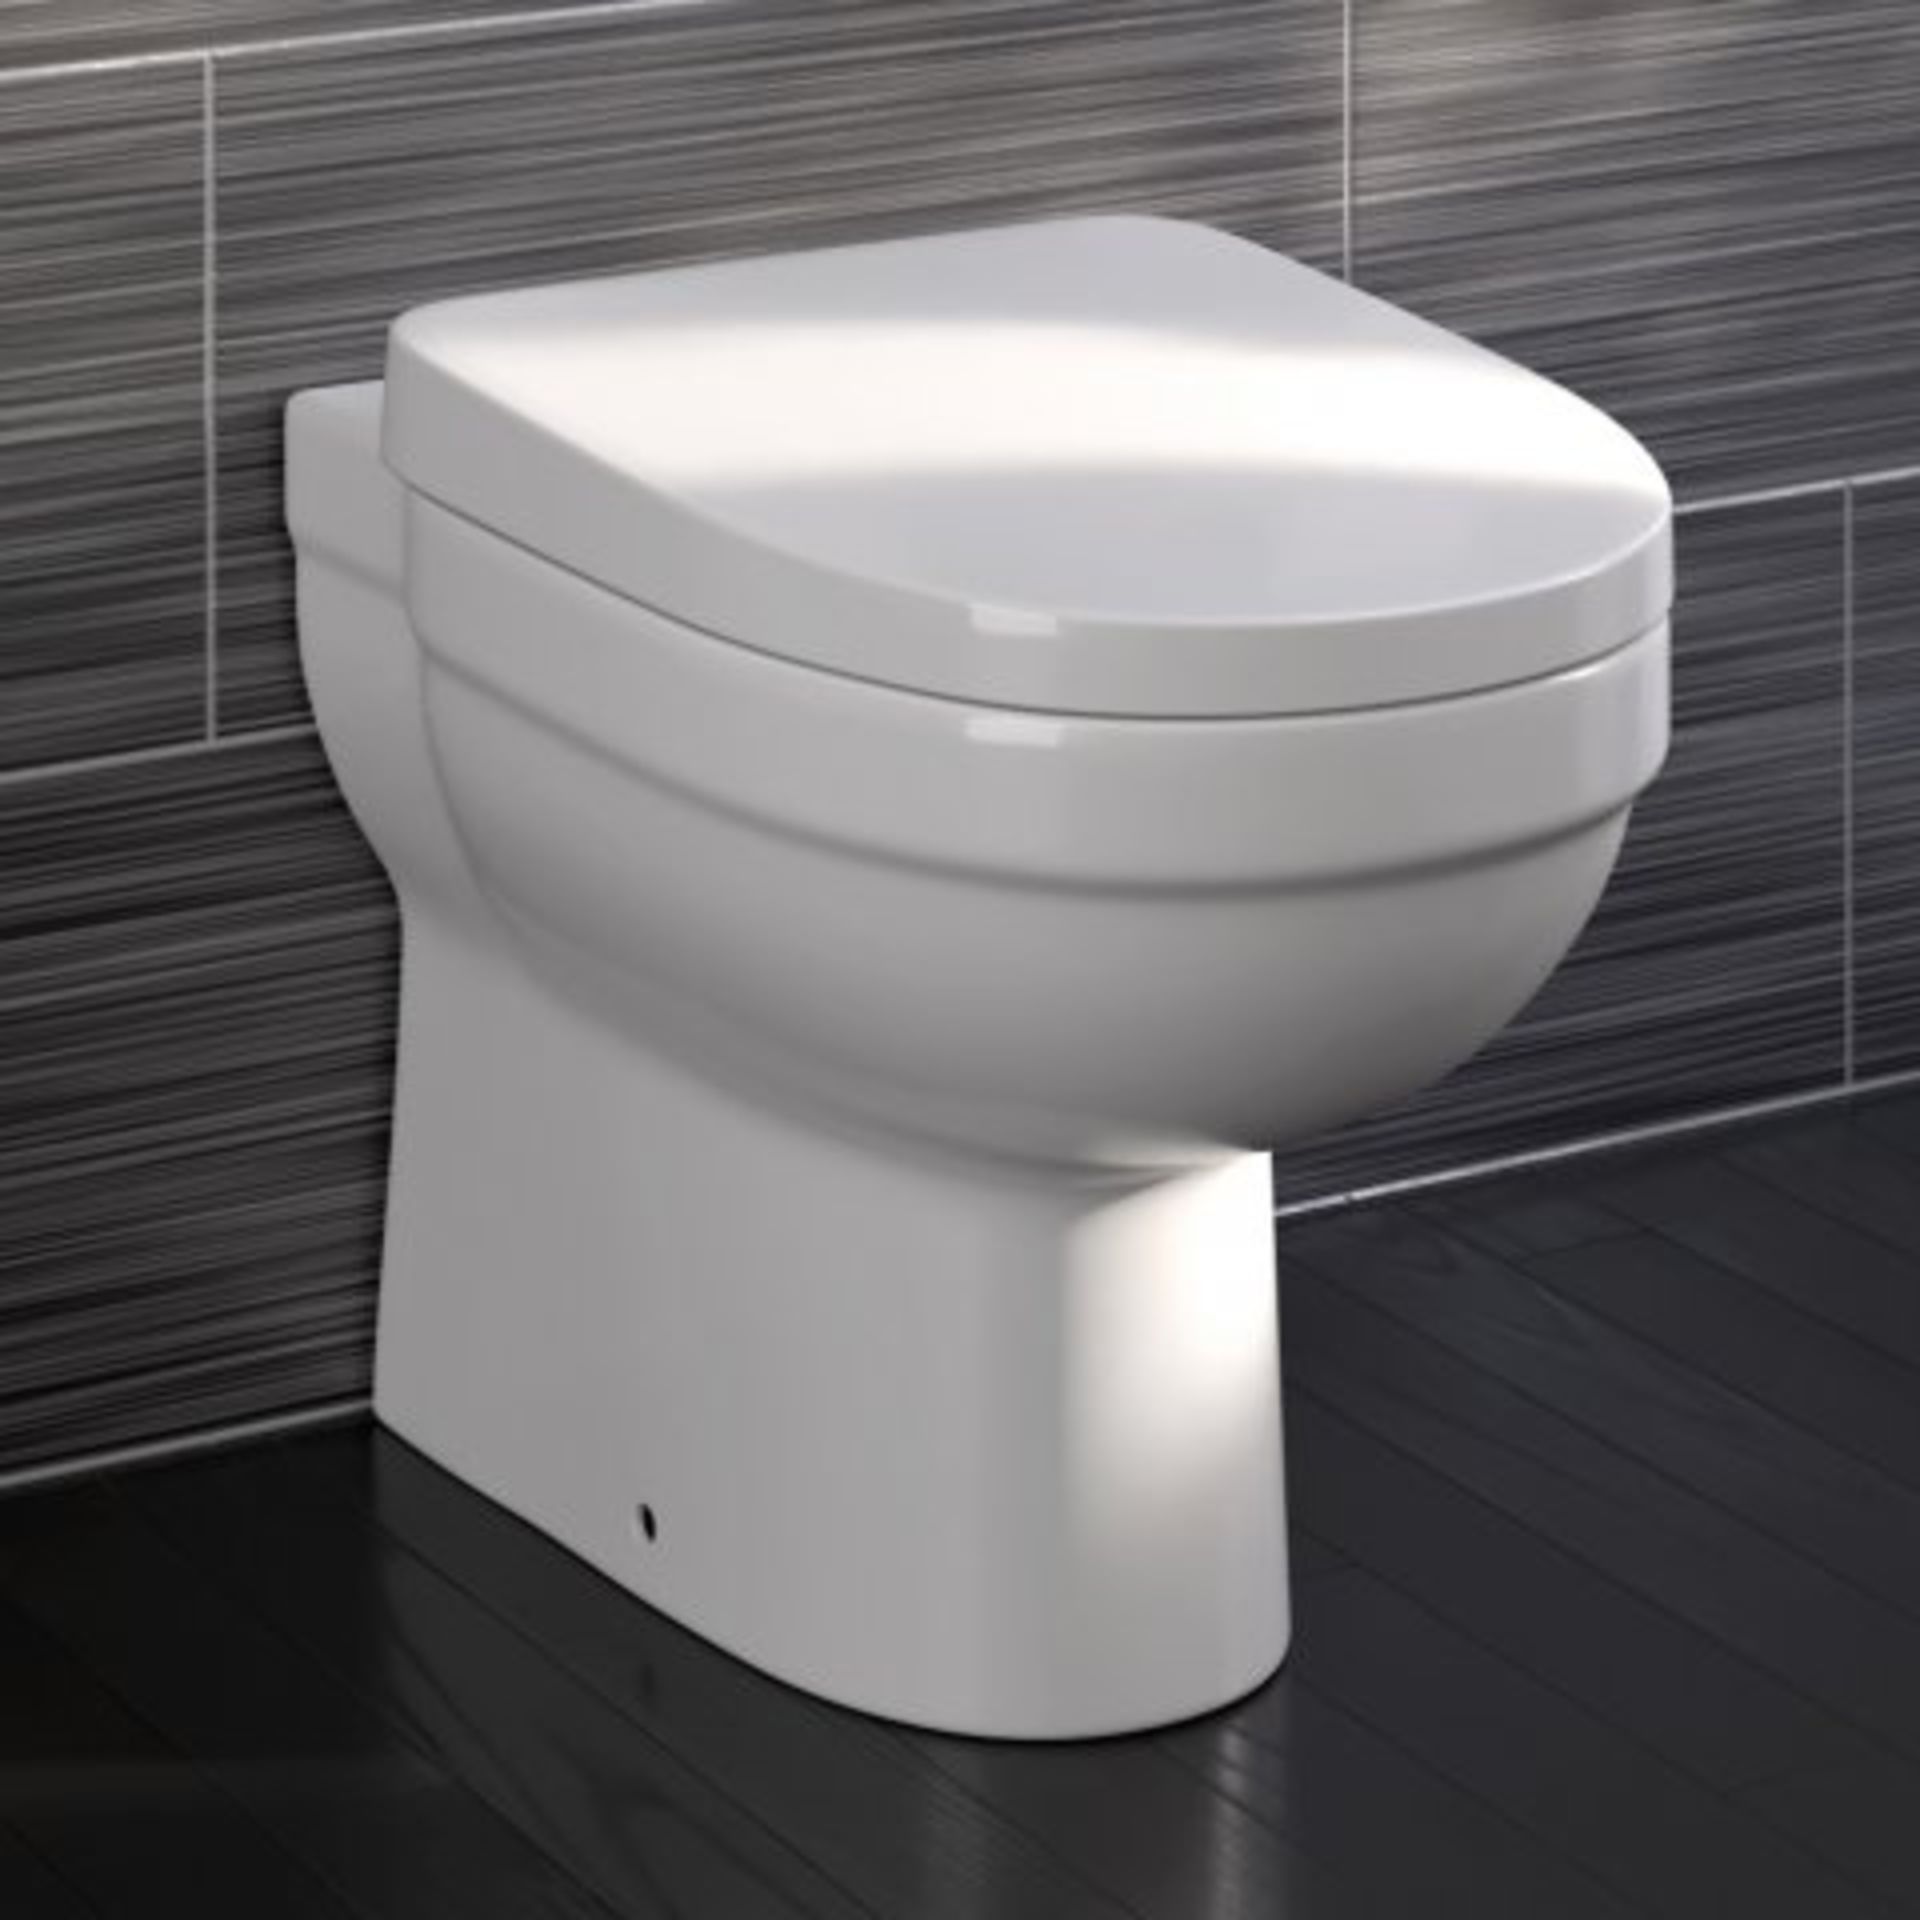 (I181) Sabrosa II Back to Wall Toilet inc Soft Close Seat. RRP £349.99. Soft Close Action We don't